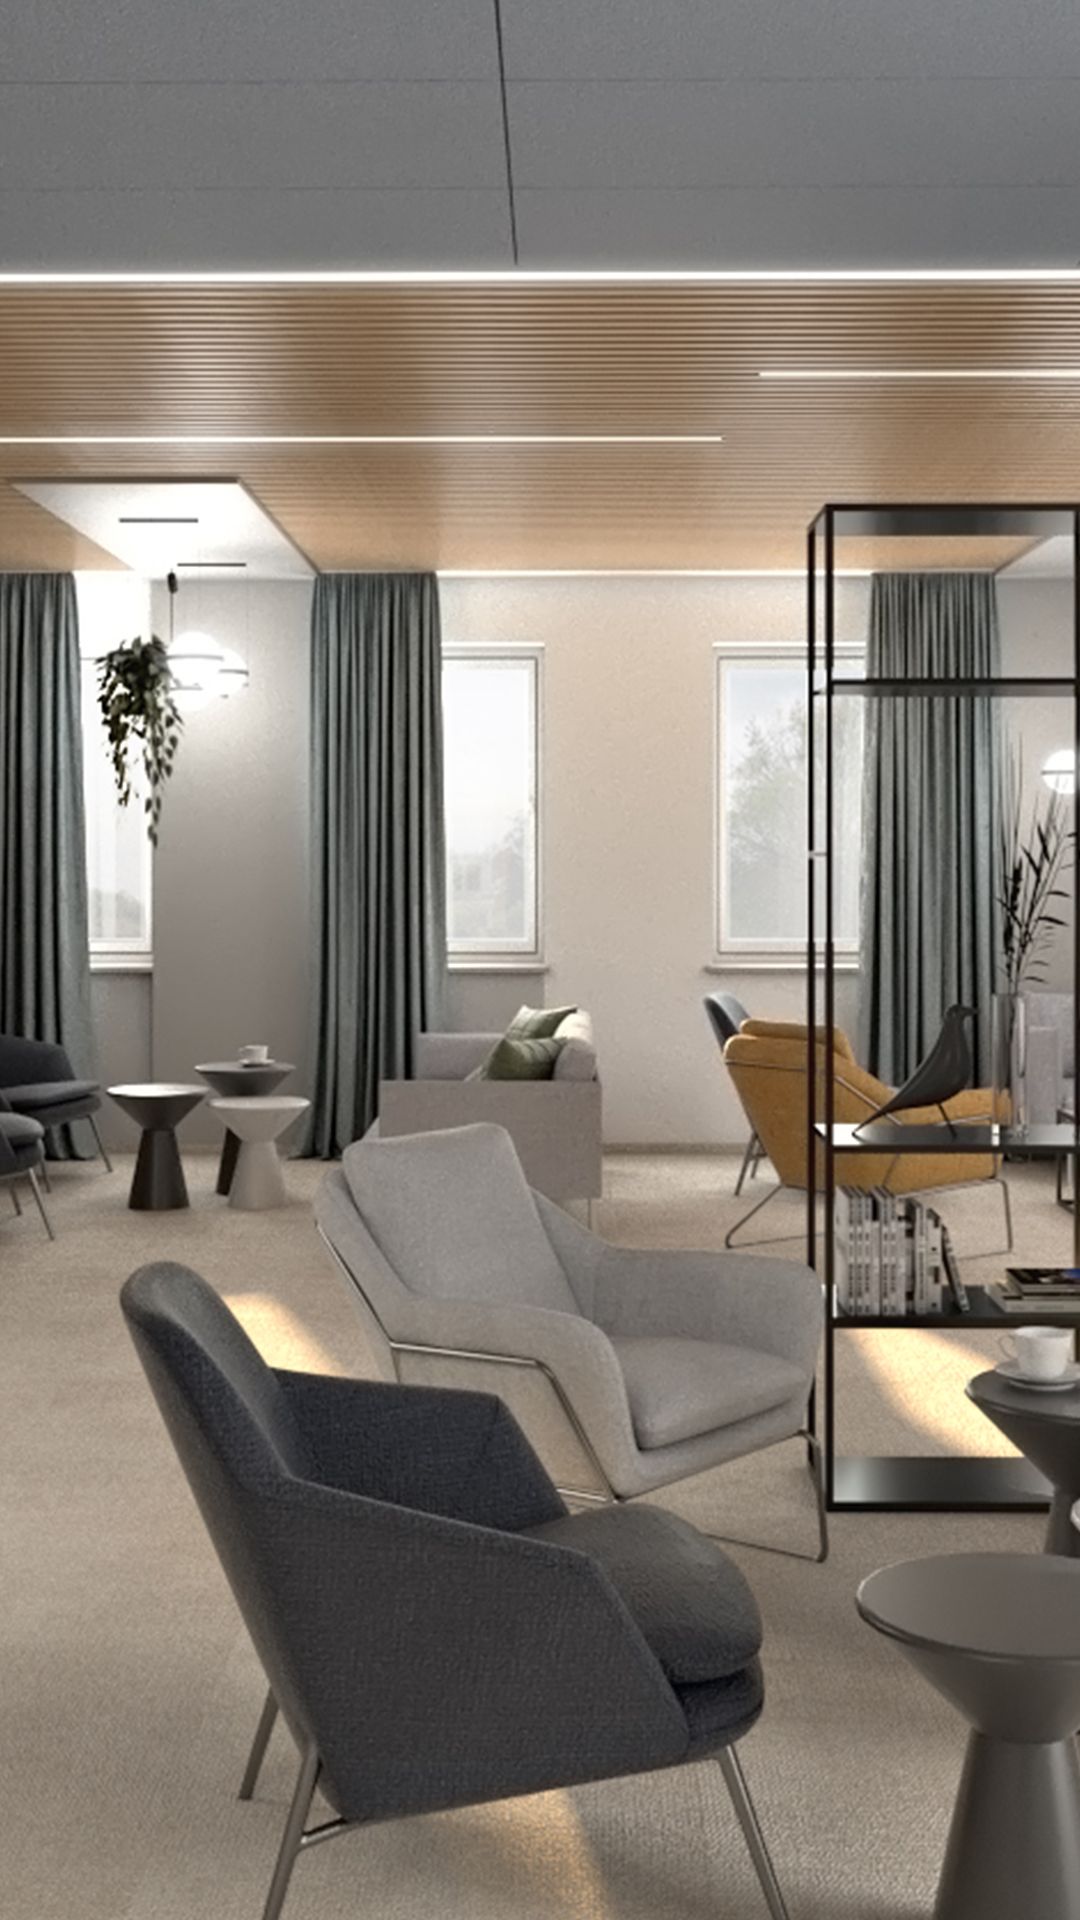 Kreativa - interior design for an office at a Confidential Client in Amsterdam, a meeting place